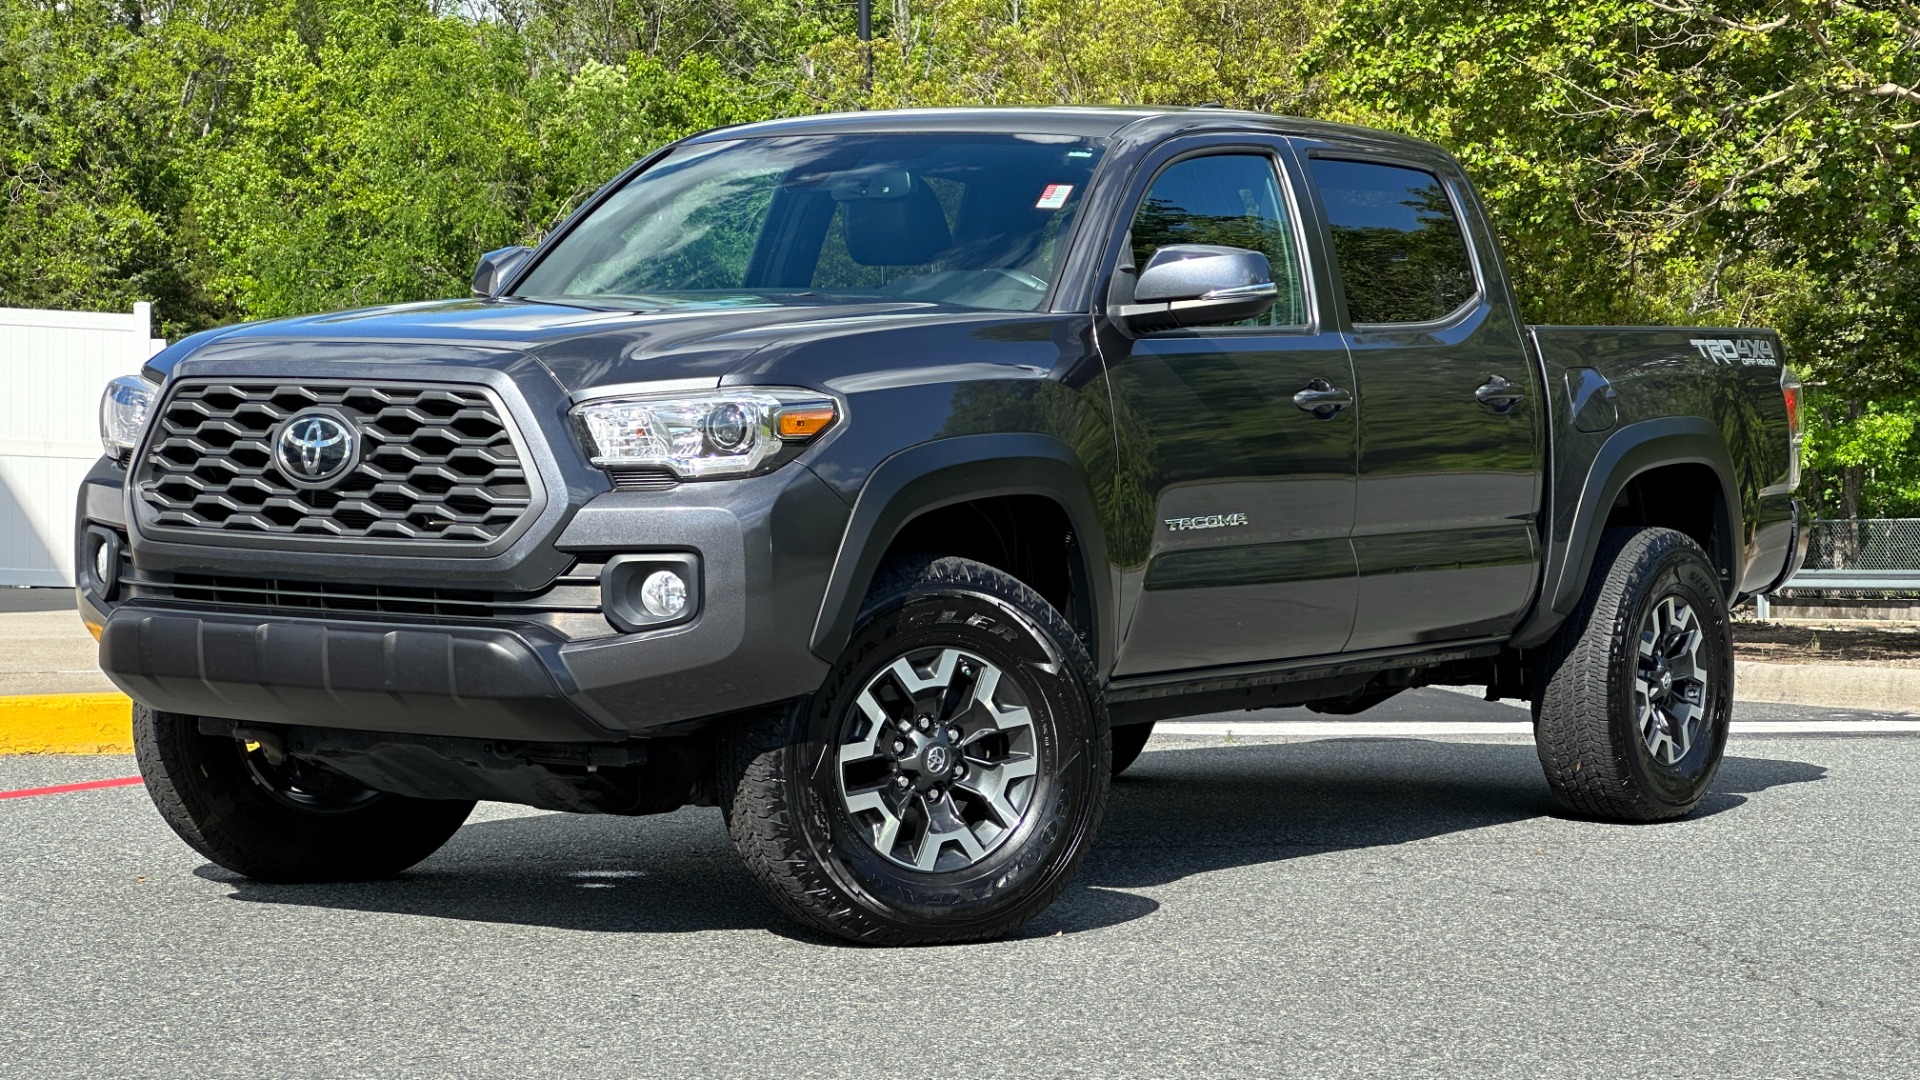 Used 2020 Toyota Tacoma 4WD TRD OFFROAD PREMIUM / 4WD / CONVENIENCE PACKAGE / LEATHER / NAVIGATION for sale Sold at Formula Imports in Charlotte NC 28227 1